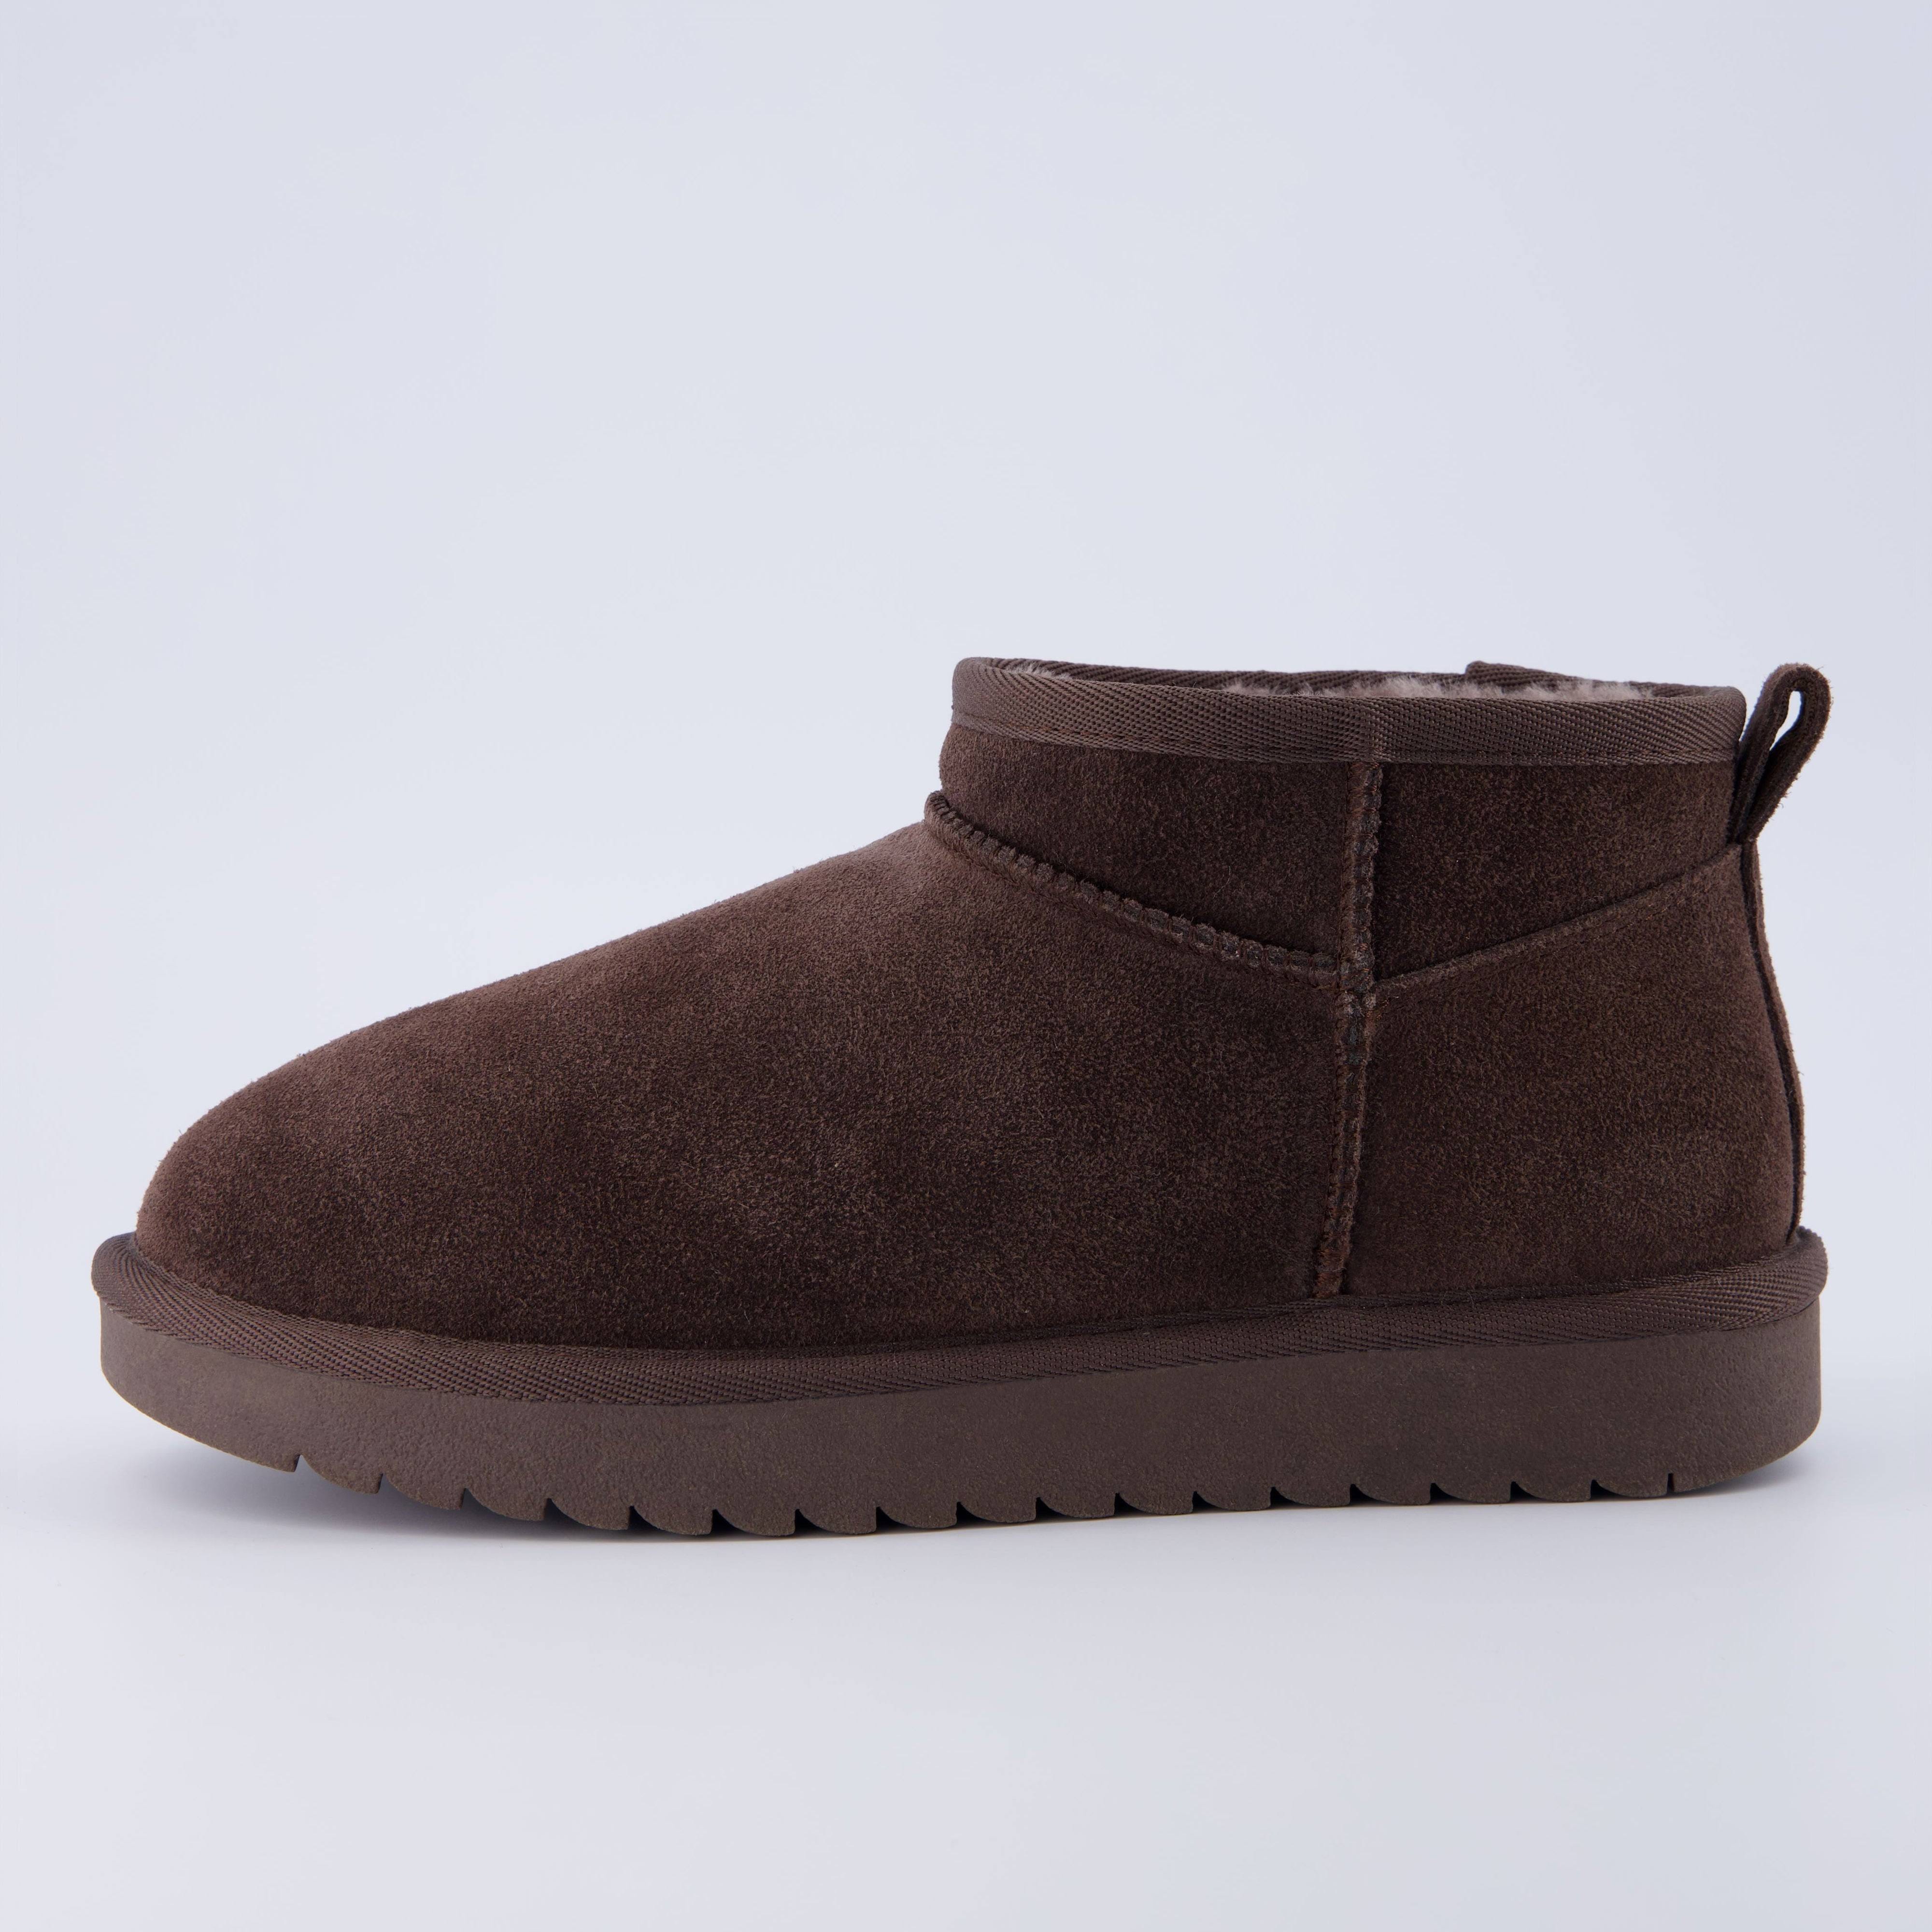 Comfortable Suede Ankle Boots with Memory Foam Insoles and Faux Fur Lining | Image